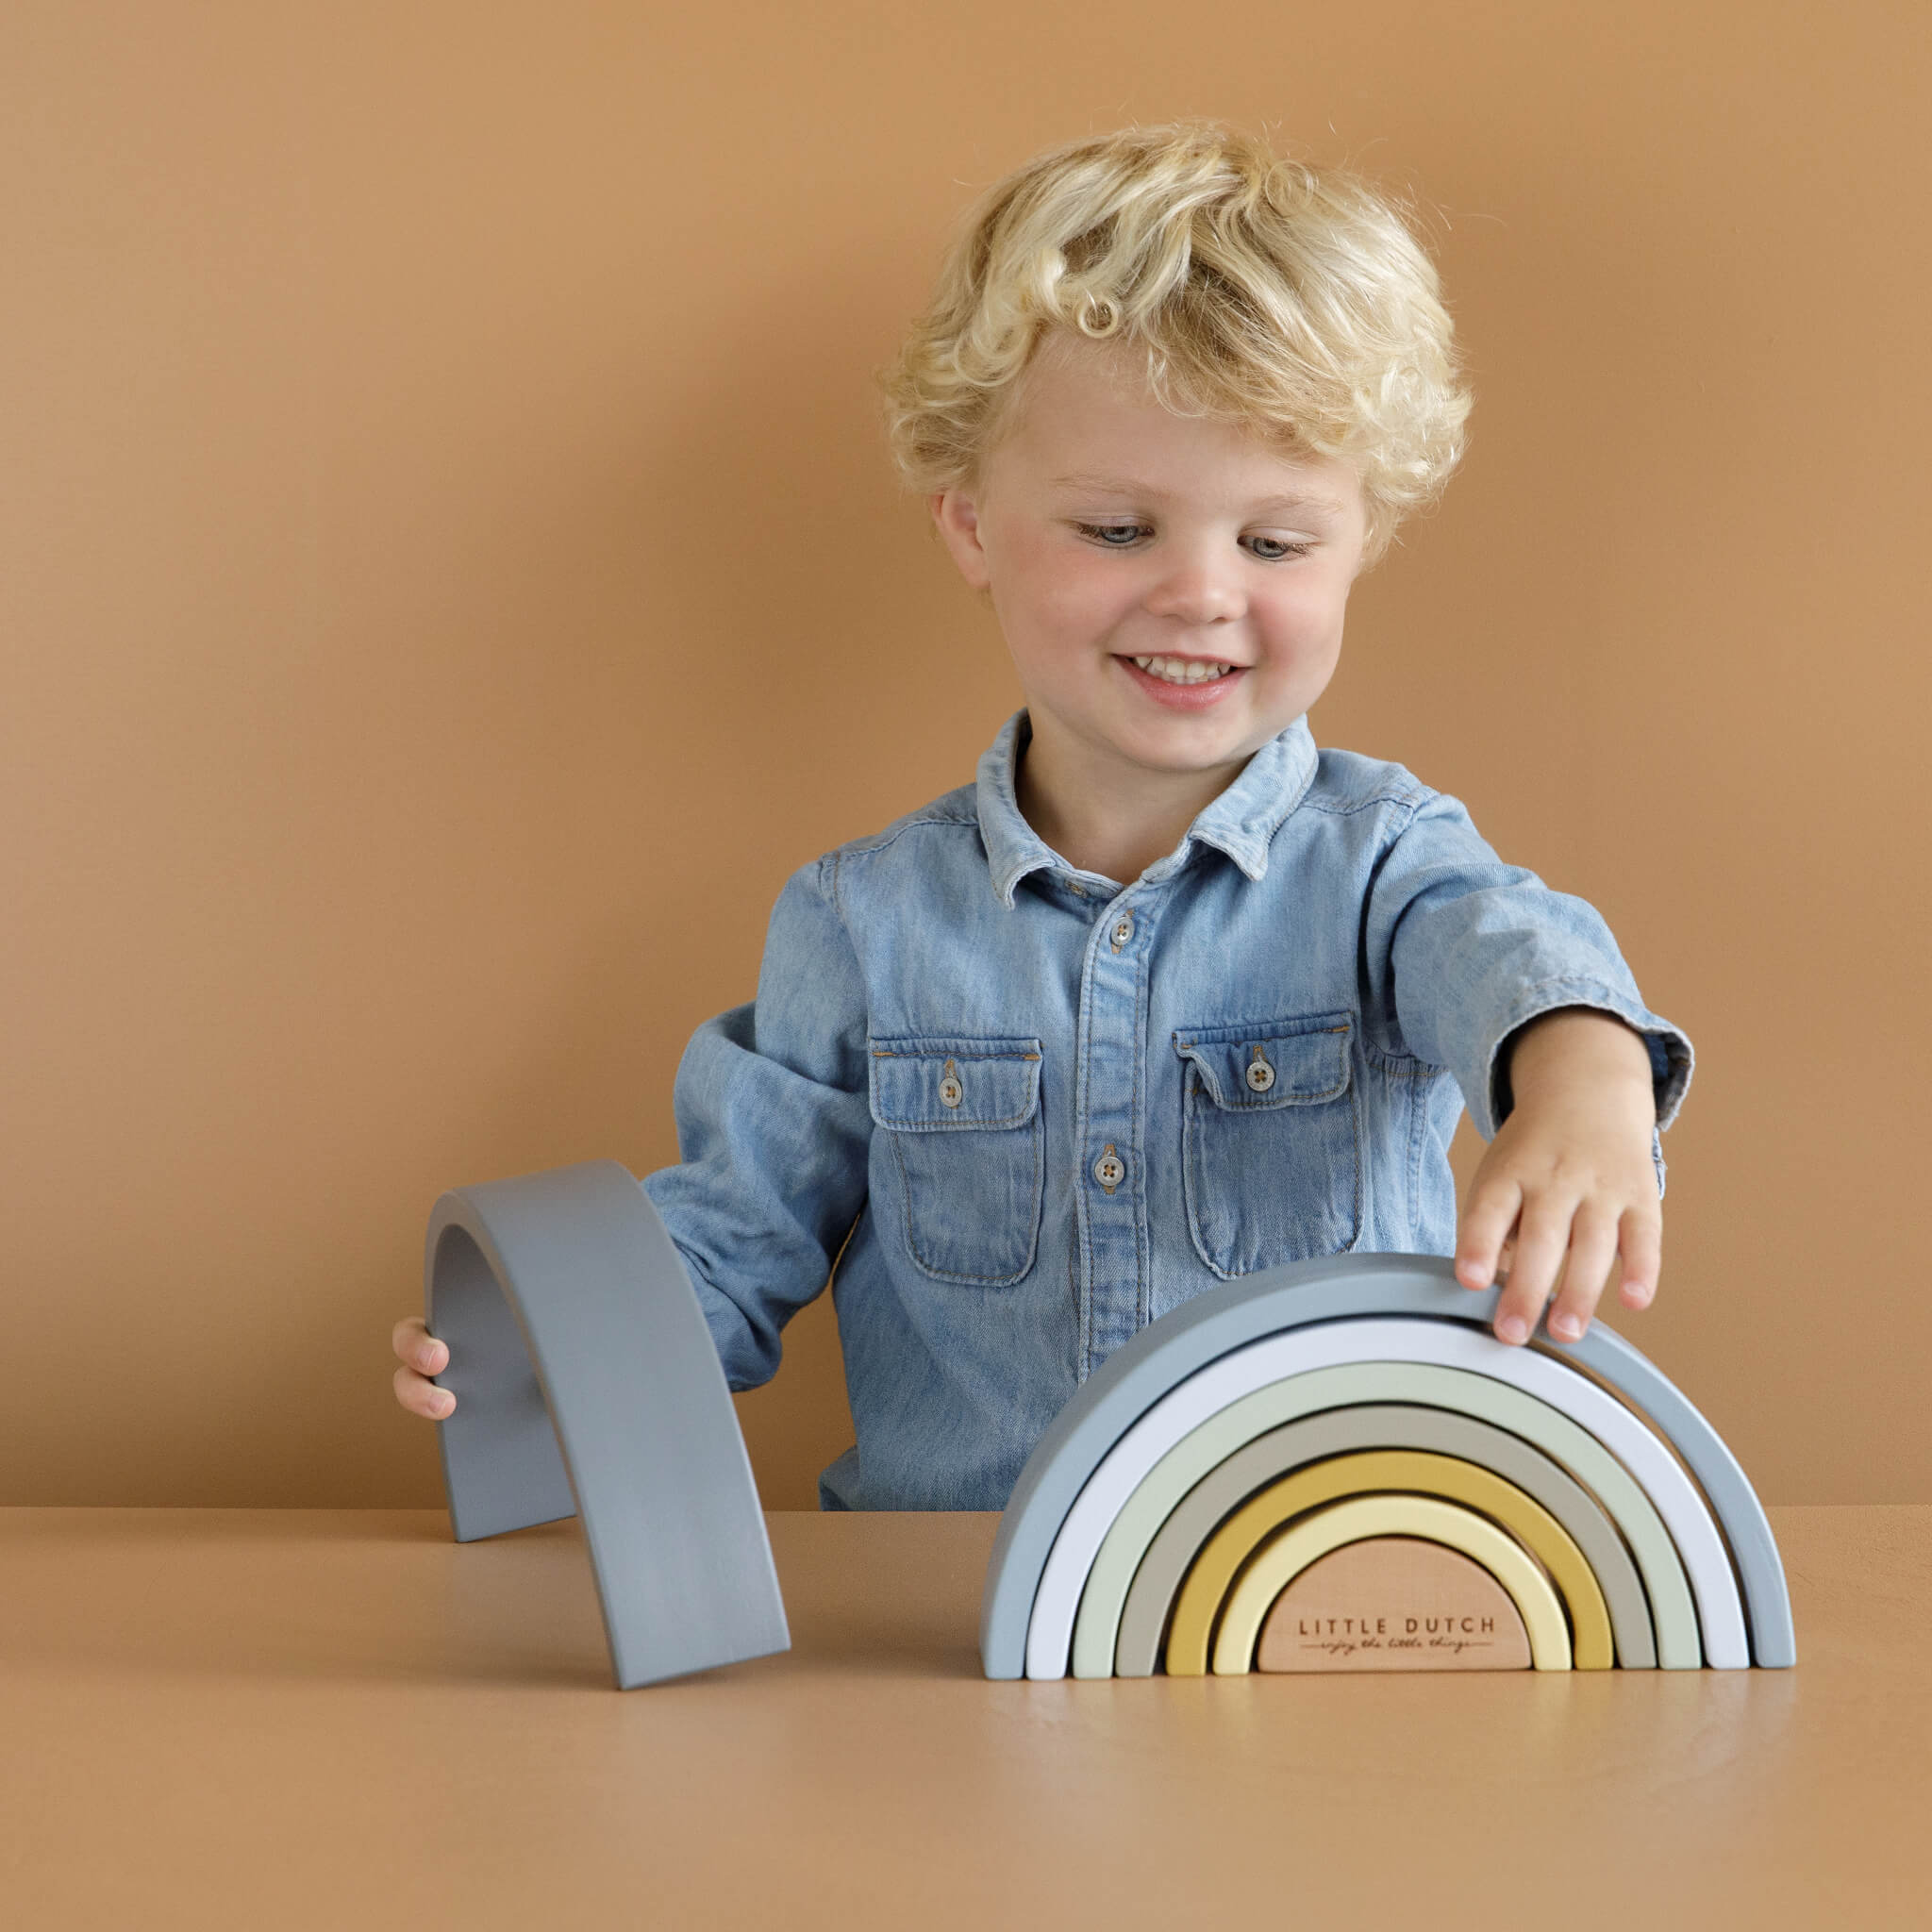 Boy Playing with Little Dutch Wooden Rainbow Stacker in Blue. Stacking Toy